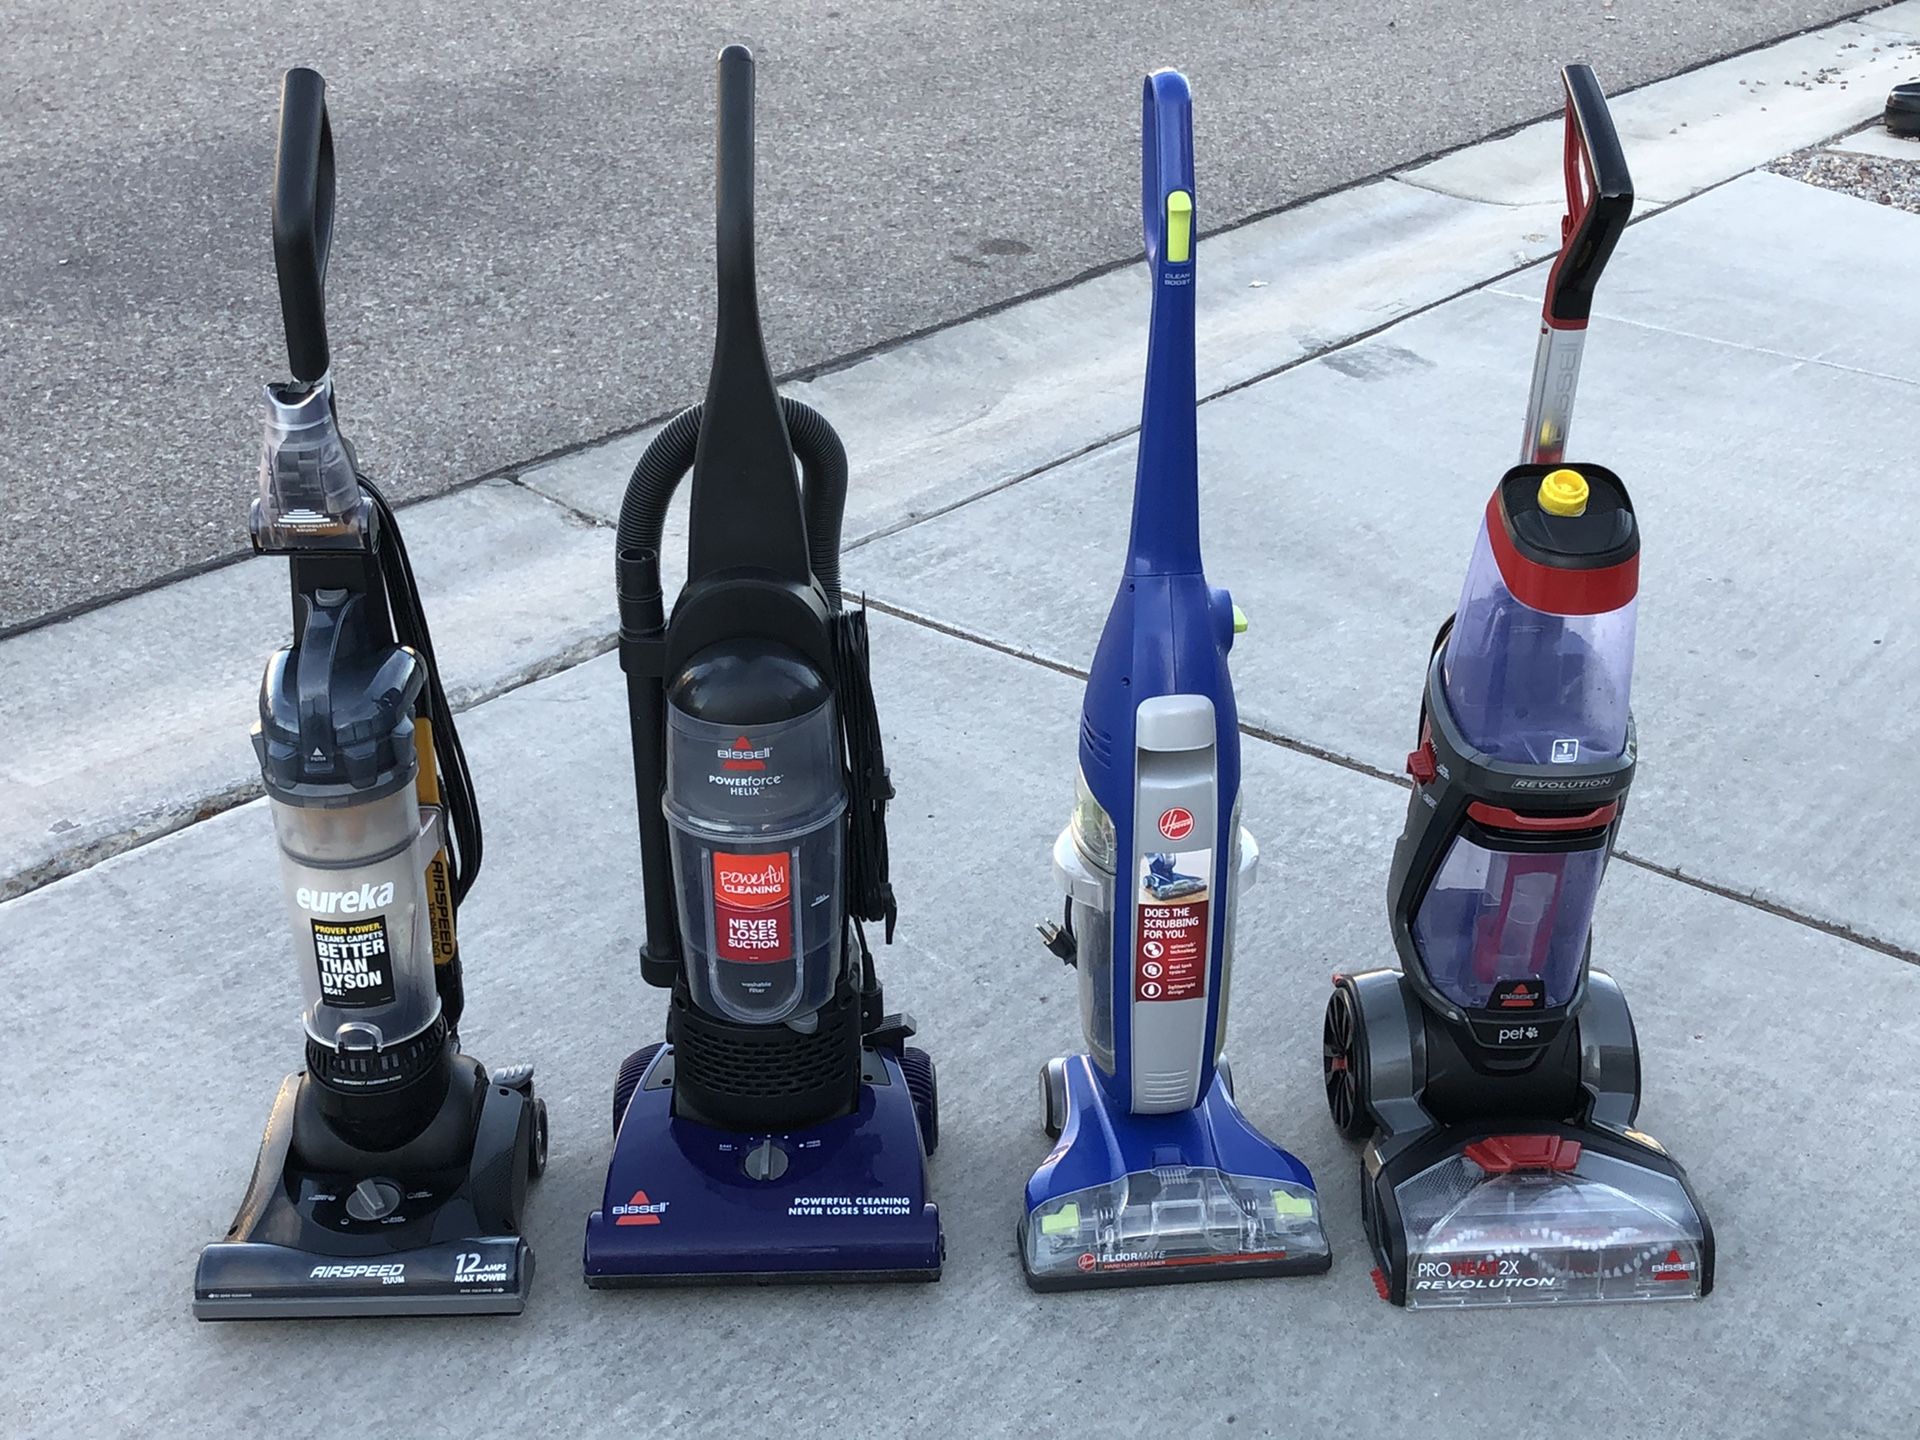 Vacuums, floor cleaner, and carpet cleaner (please read description for pricing thank you)